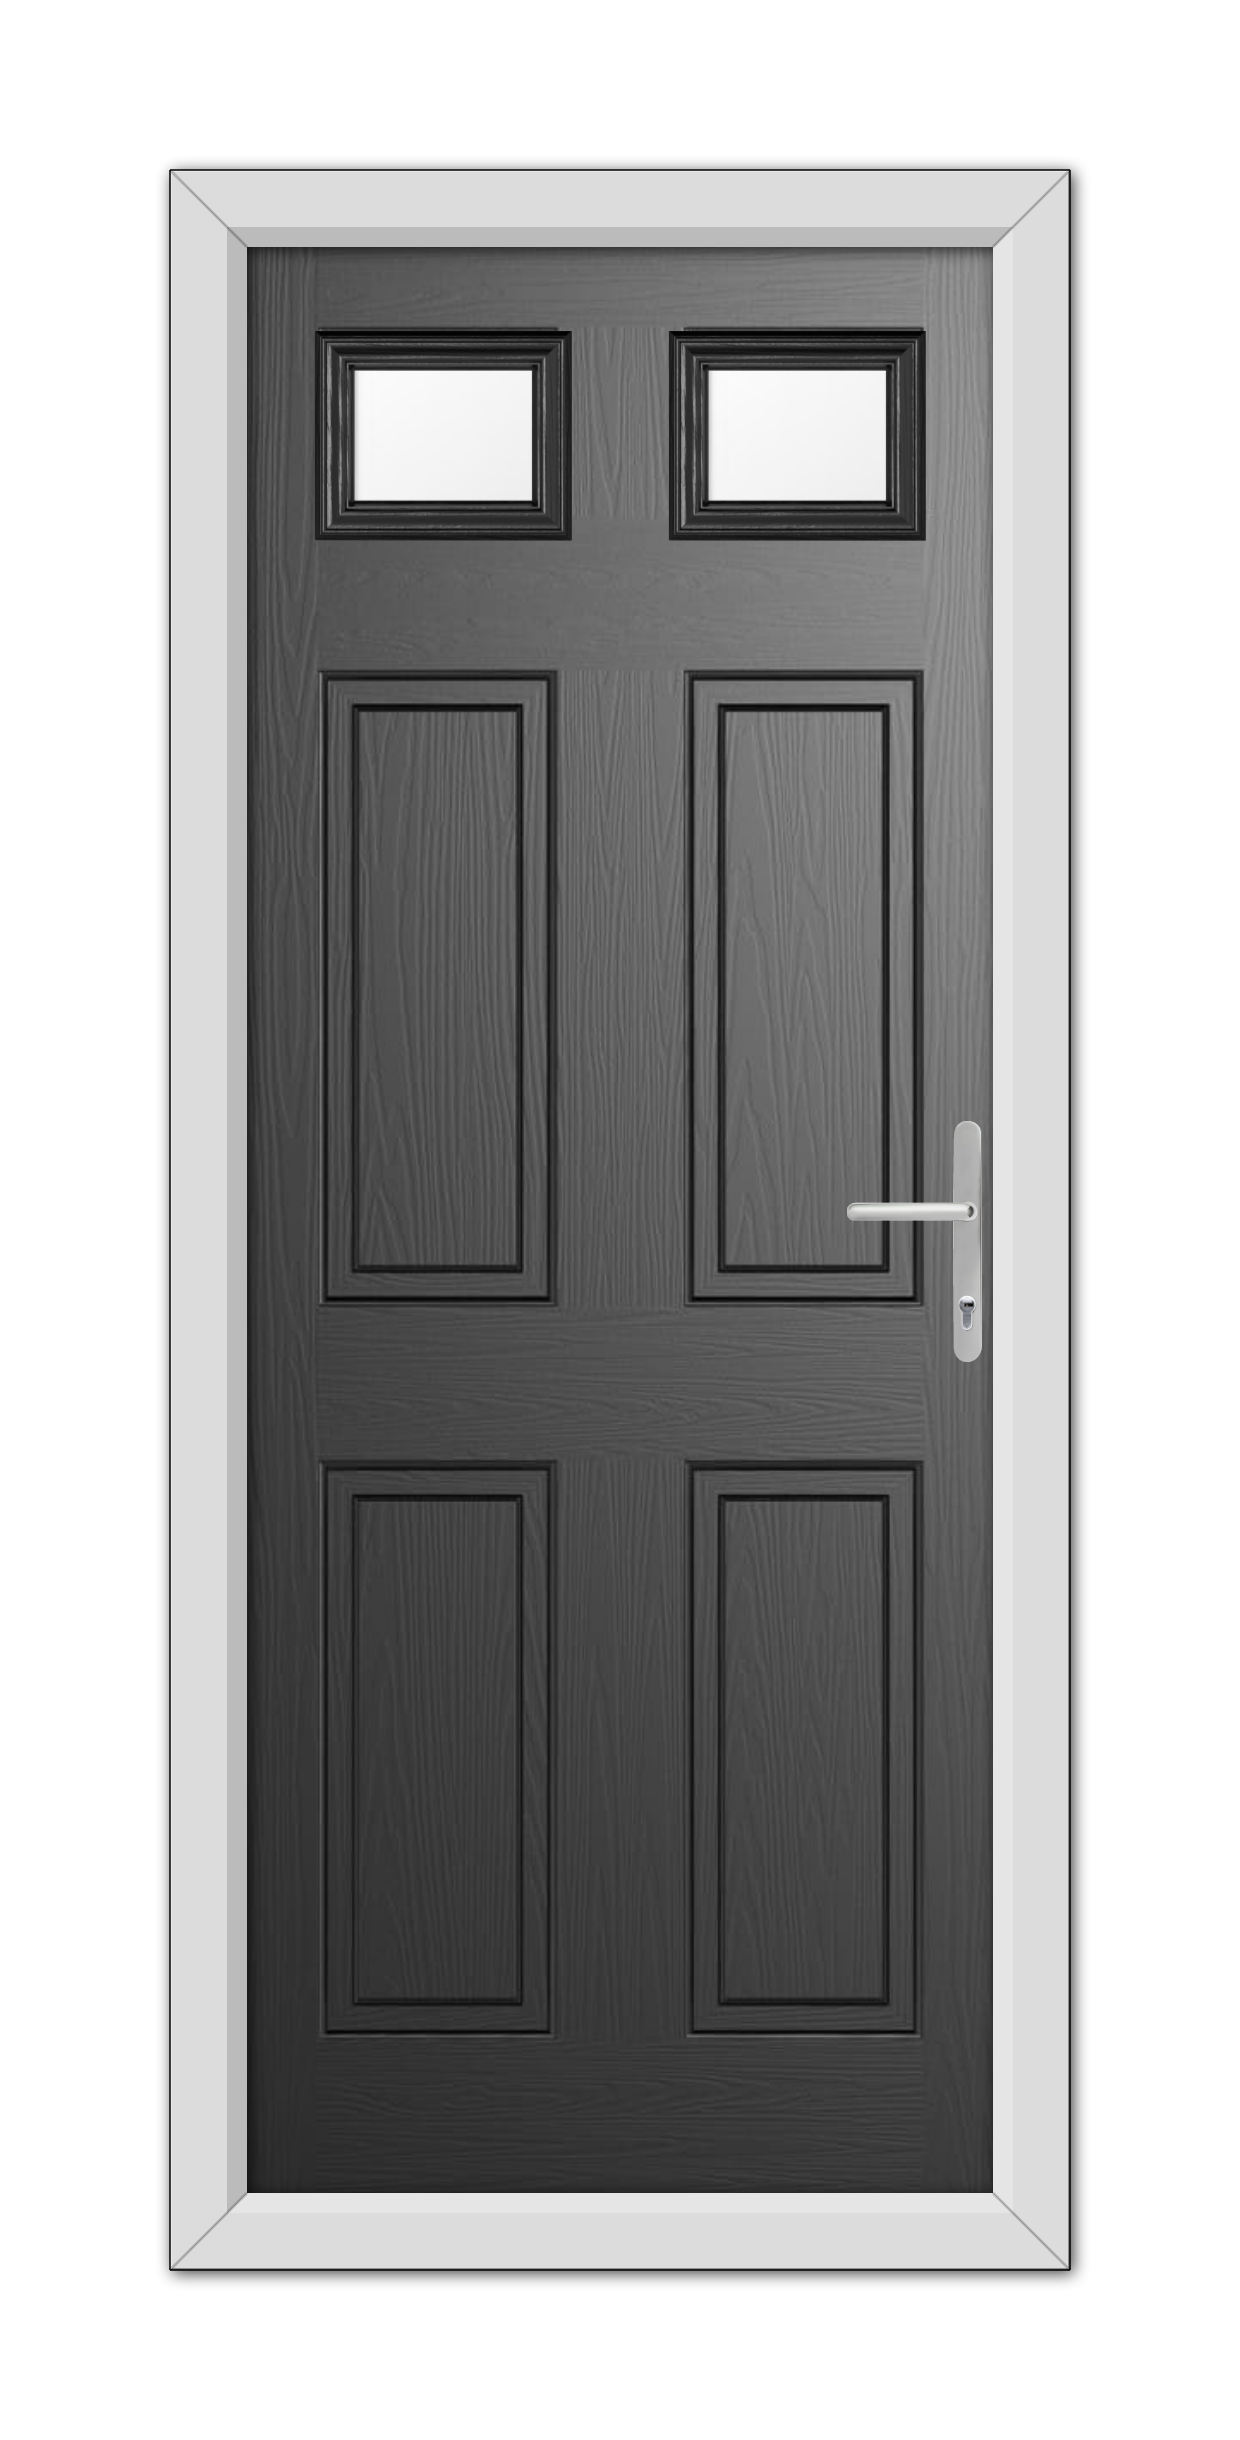 A modern Black Middleton Glazed 2 Composite Door 48mm Timber Core with a white frame, featuring four panels and three small windows at the top.